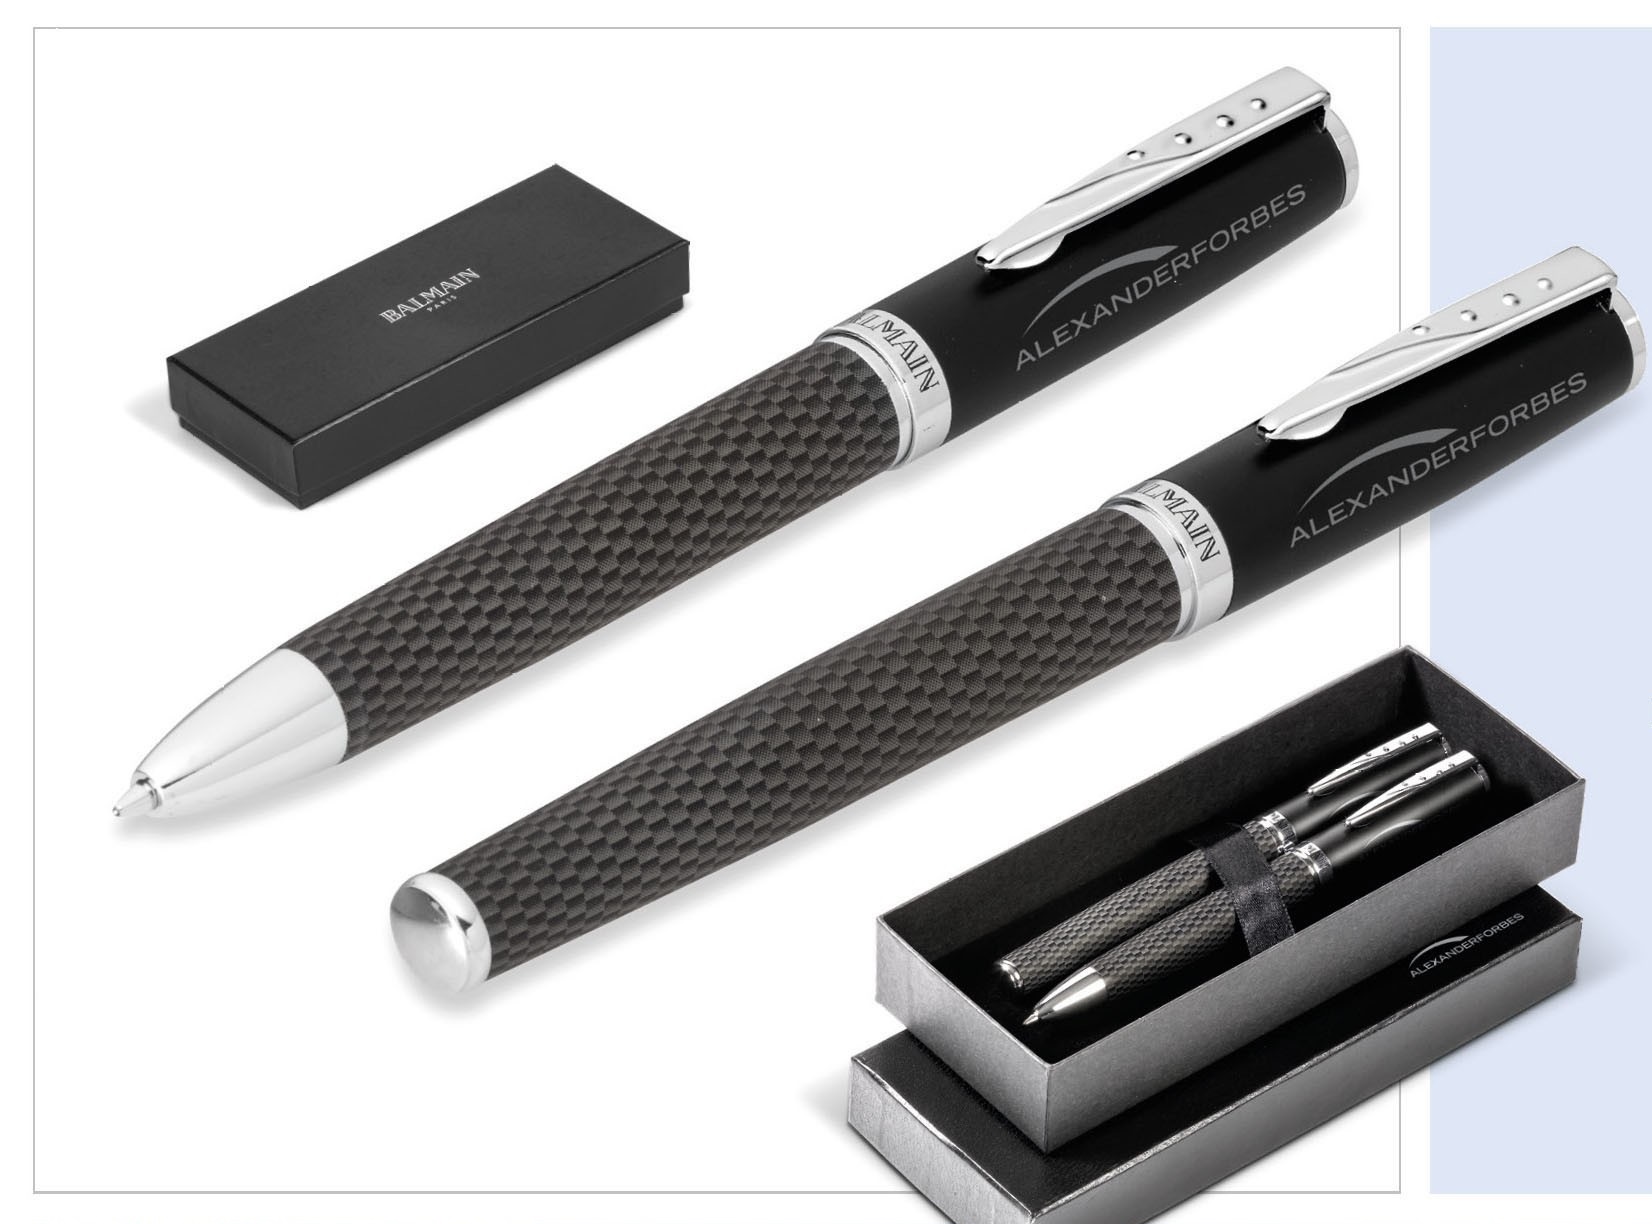 Whistle bubble pen for sale from Perkal Promo